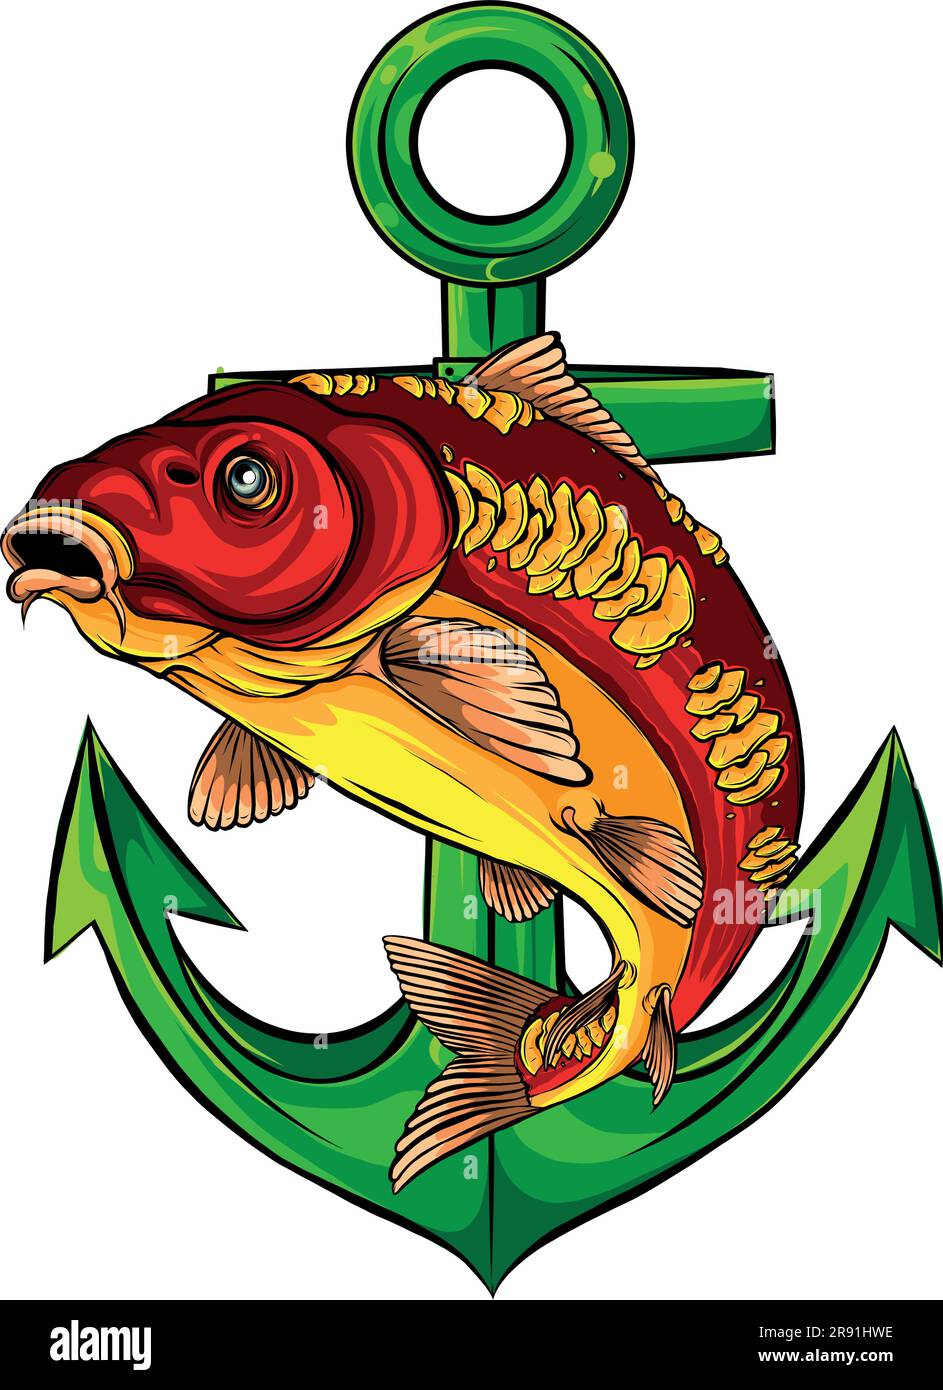 vector illustration of carp fish with anchor Stock Vector